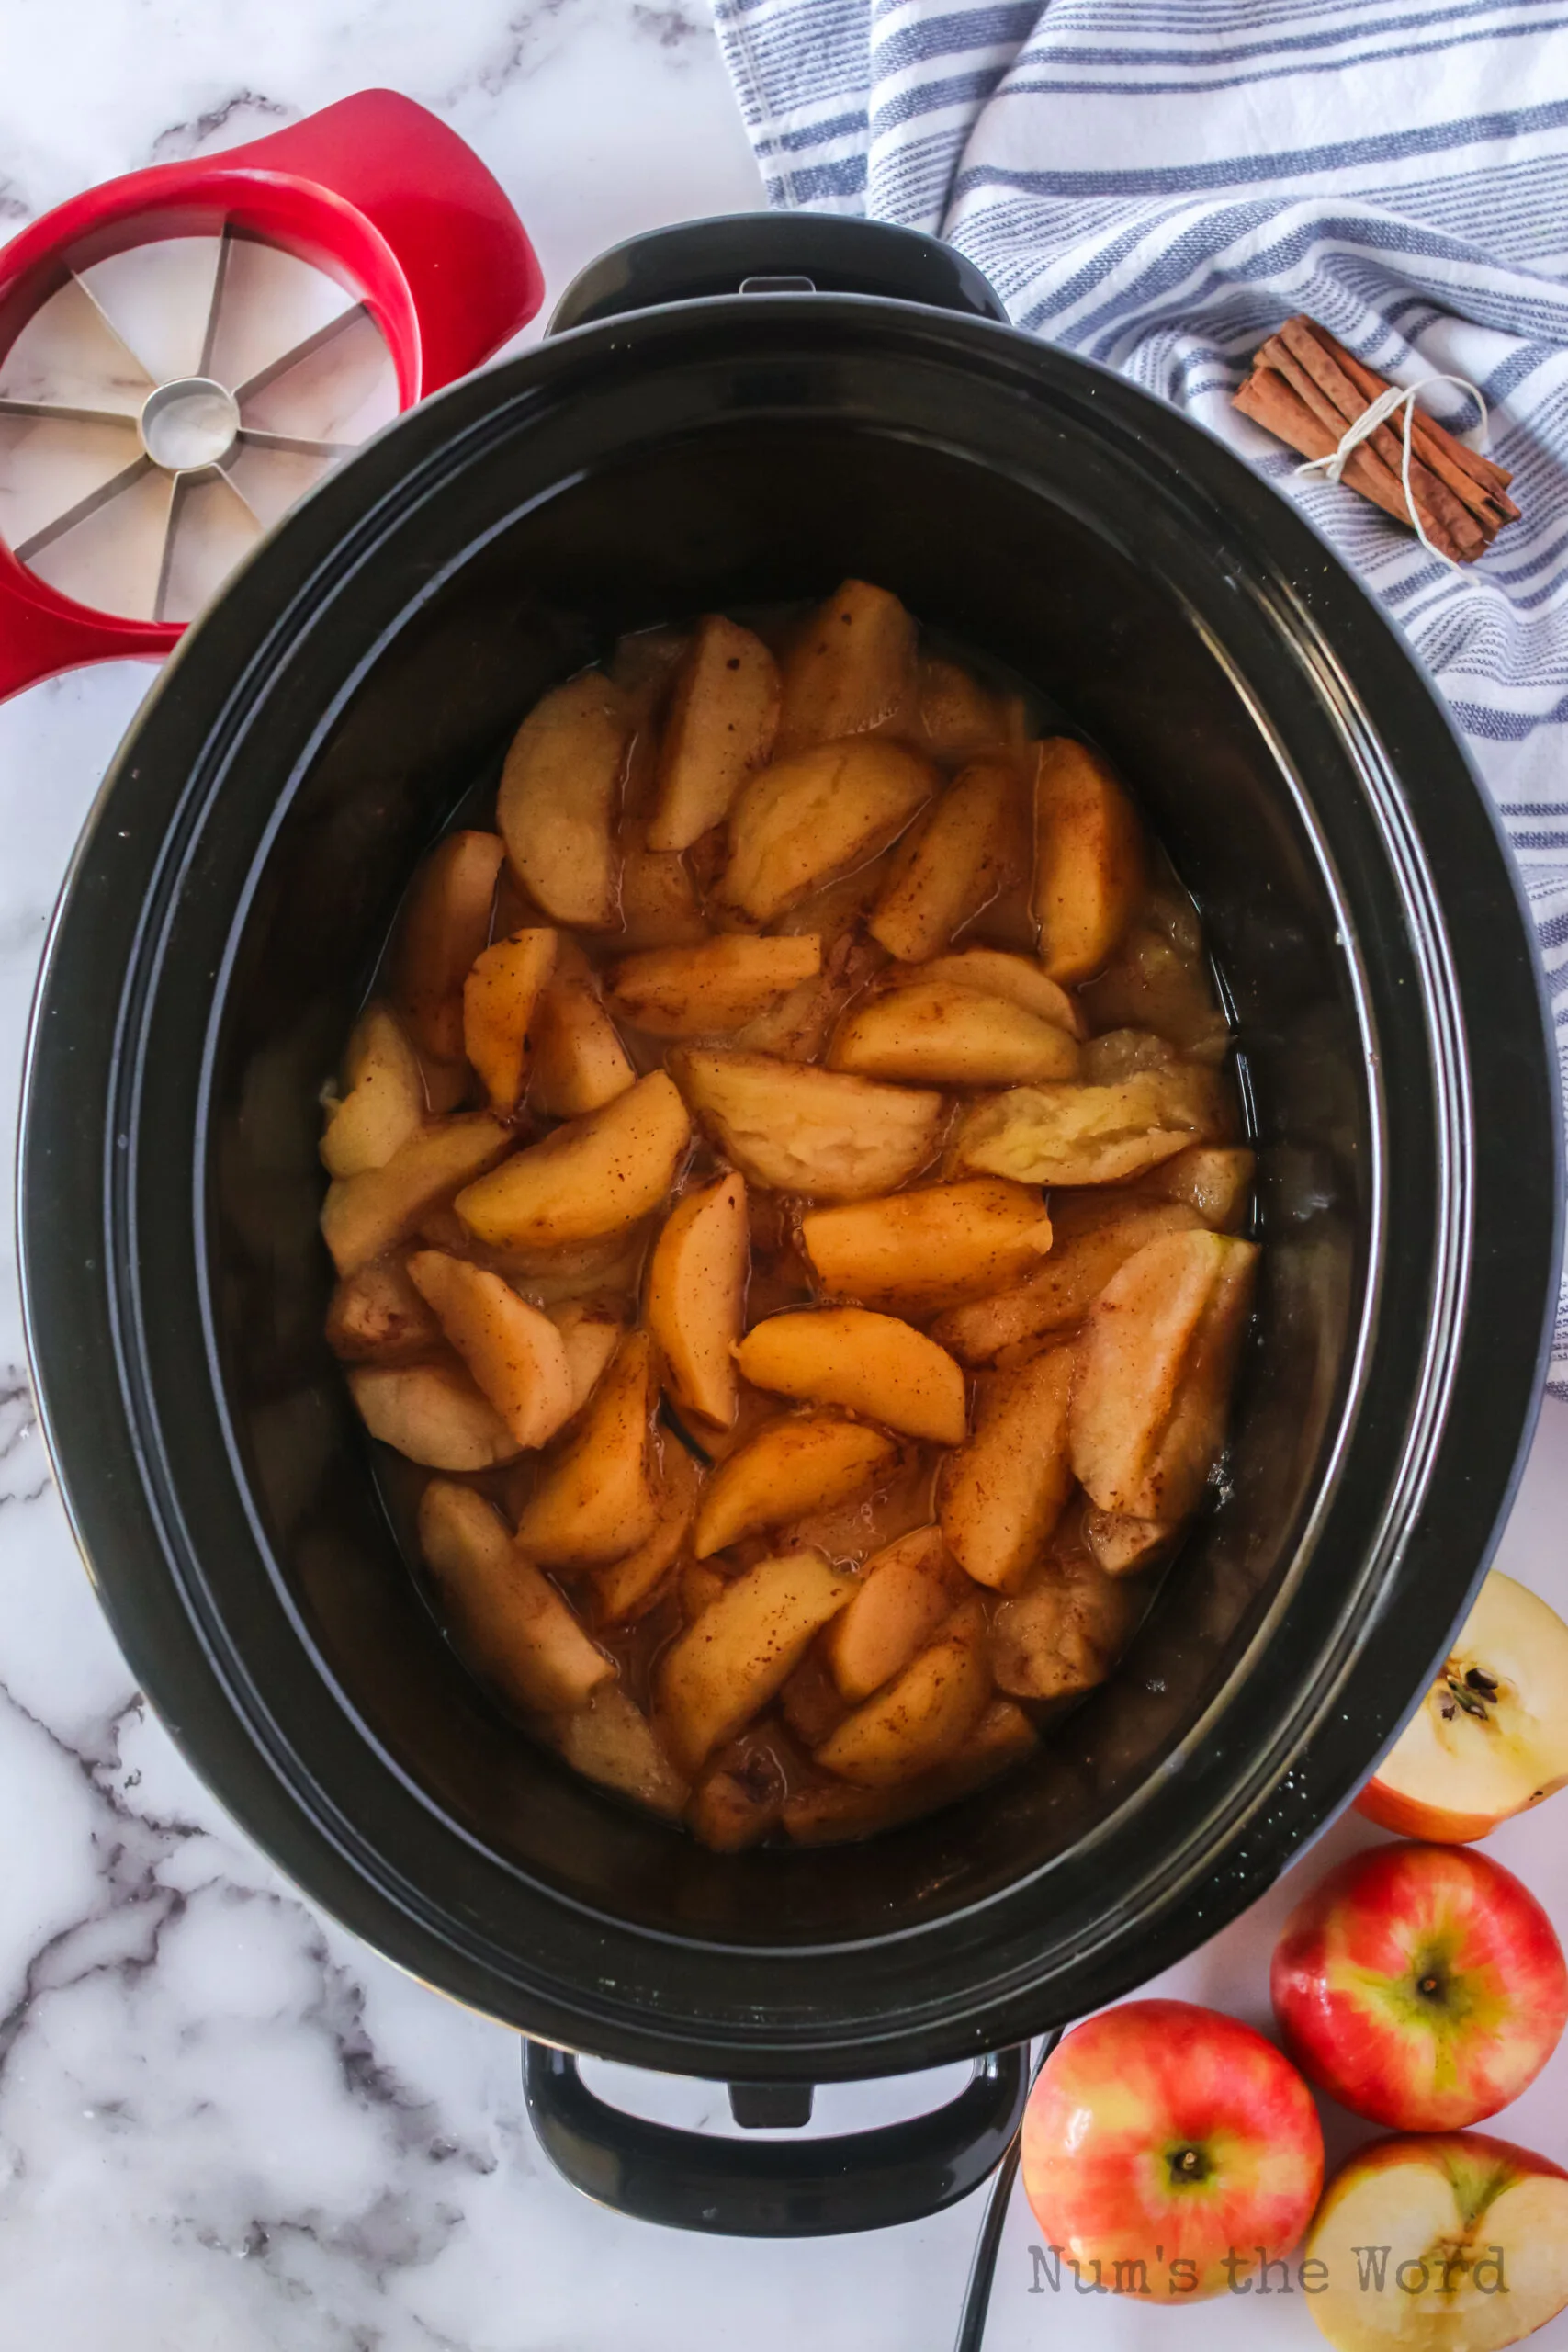 cooked apples in crockpot, ready to mash